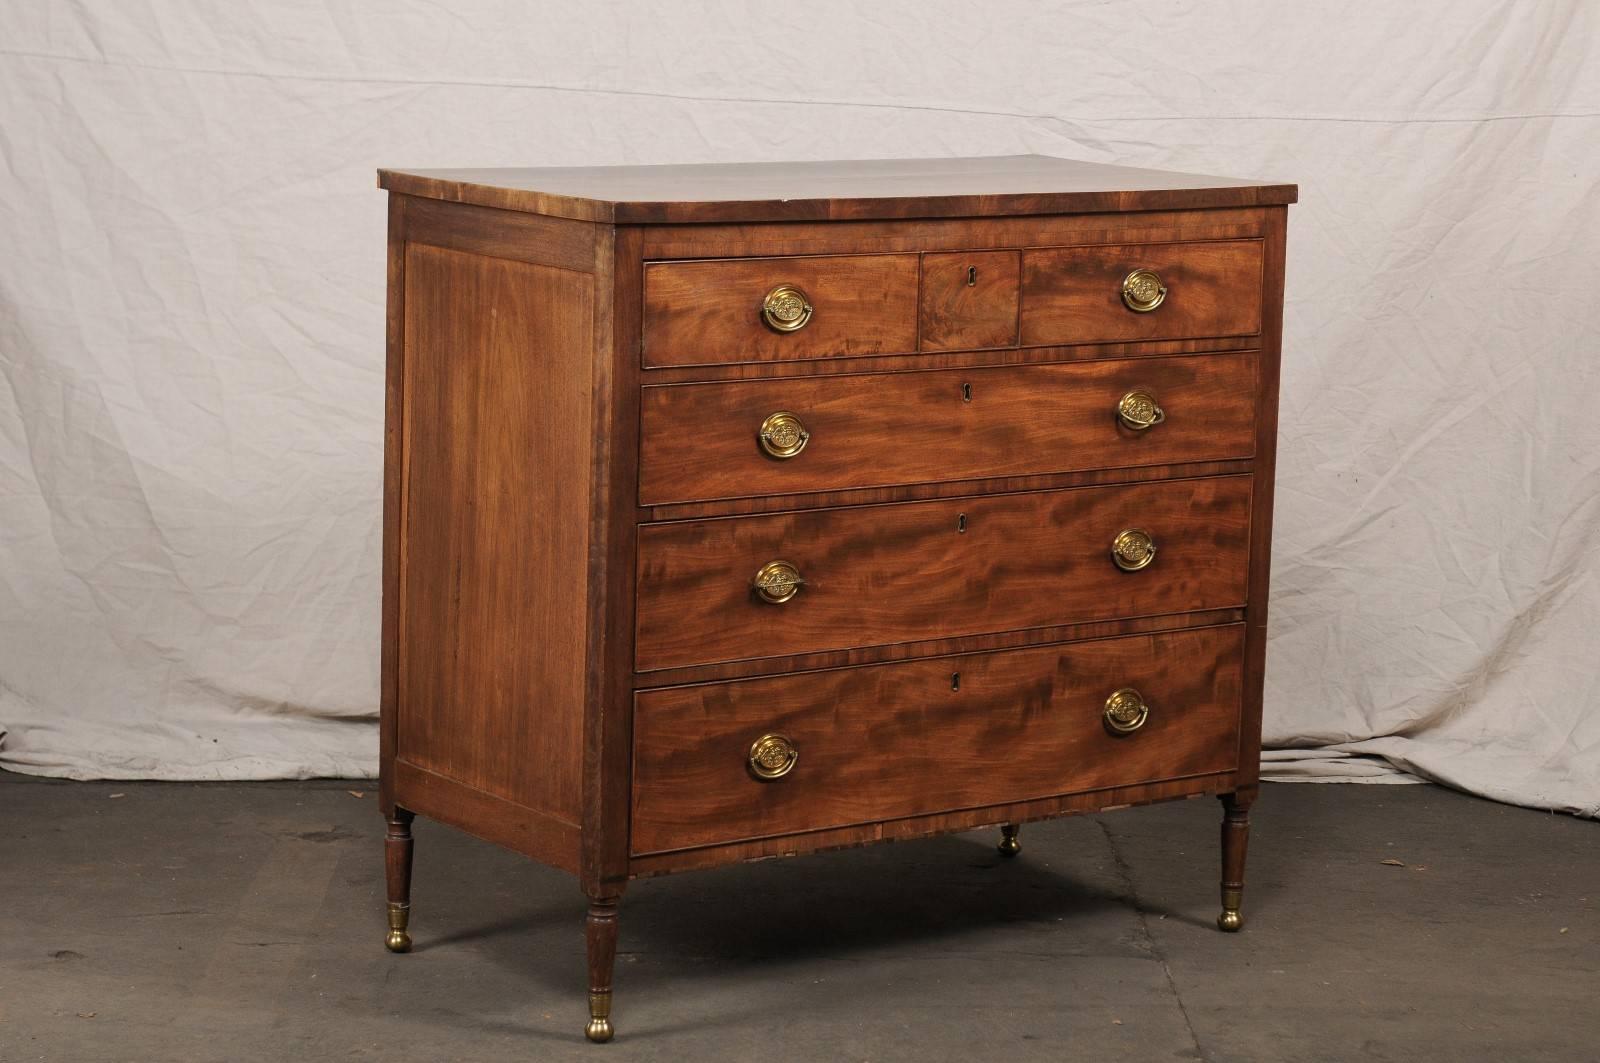 Early 19th Century New York Federal Chest of Drawers, circa 1810